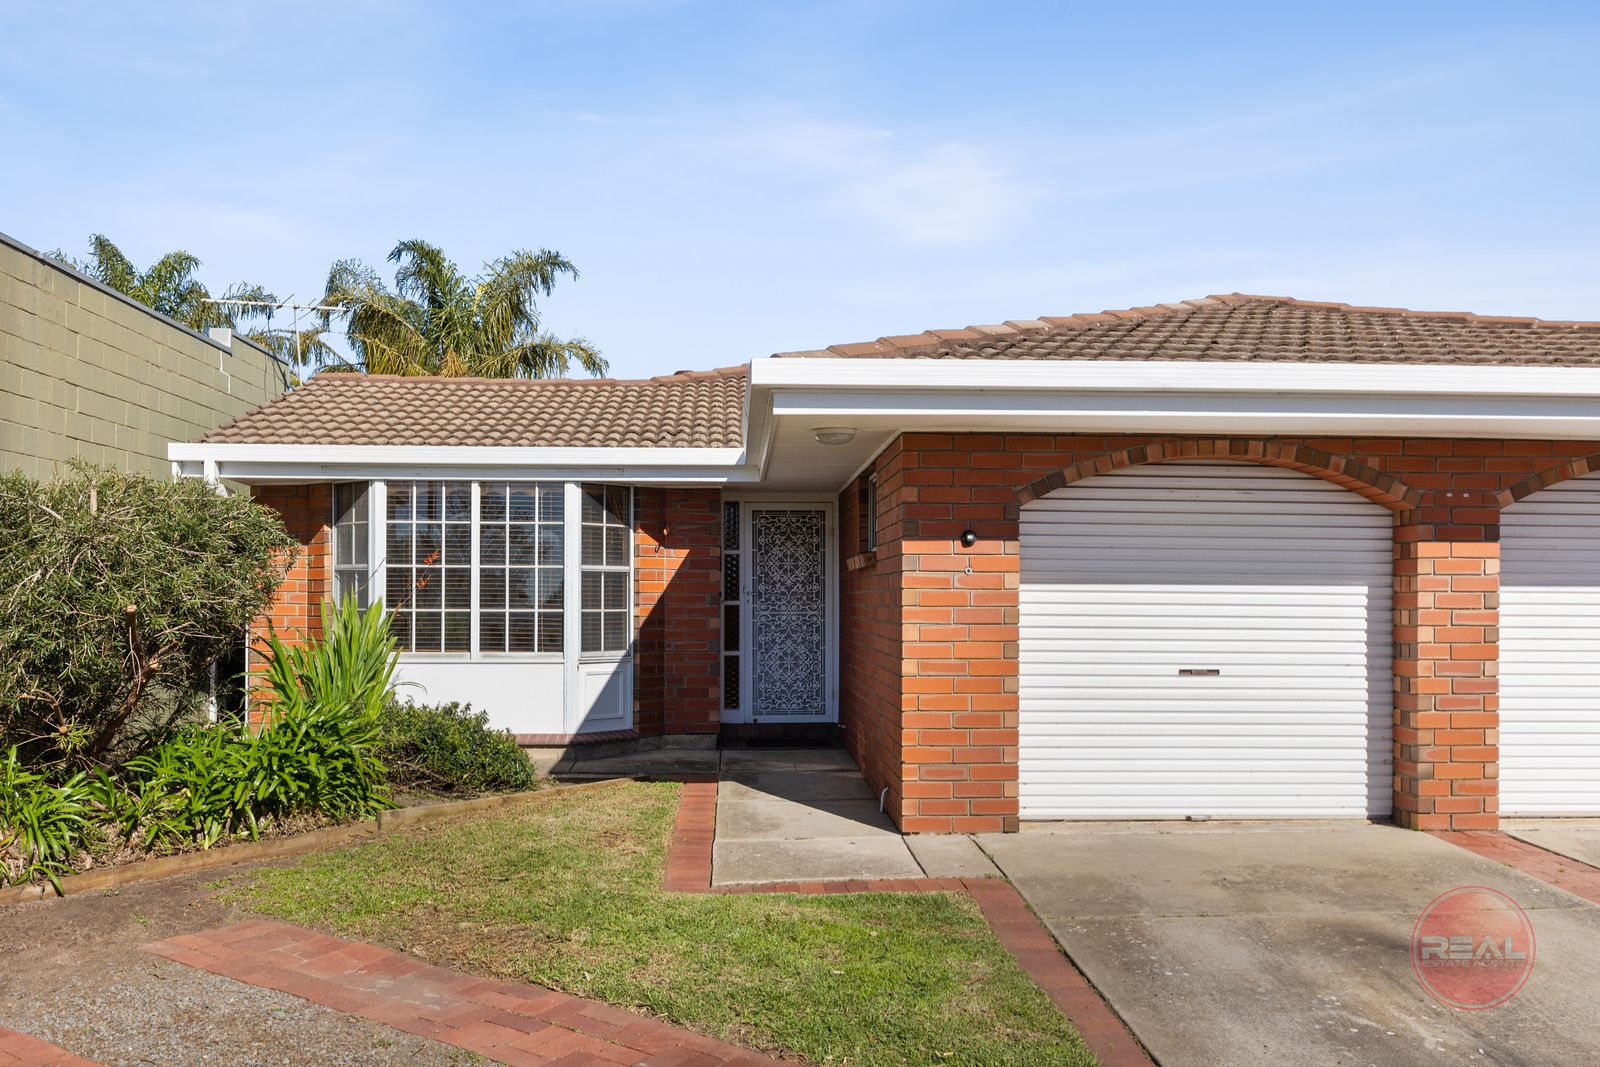 Res 2/224 Shepherds Hill Road, Bellevue Heights SA 5050, Image 0